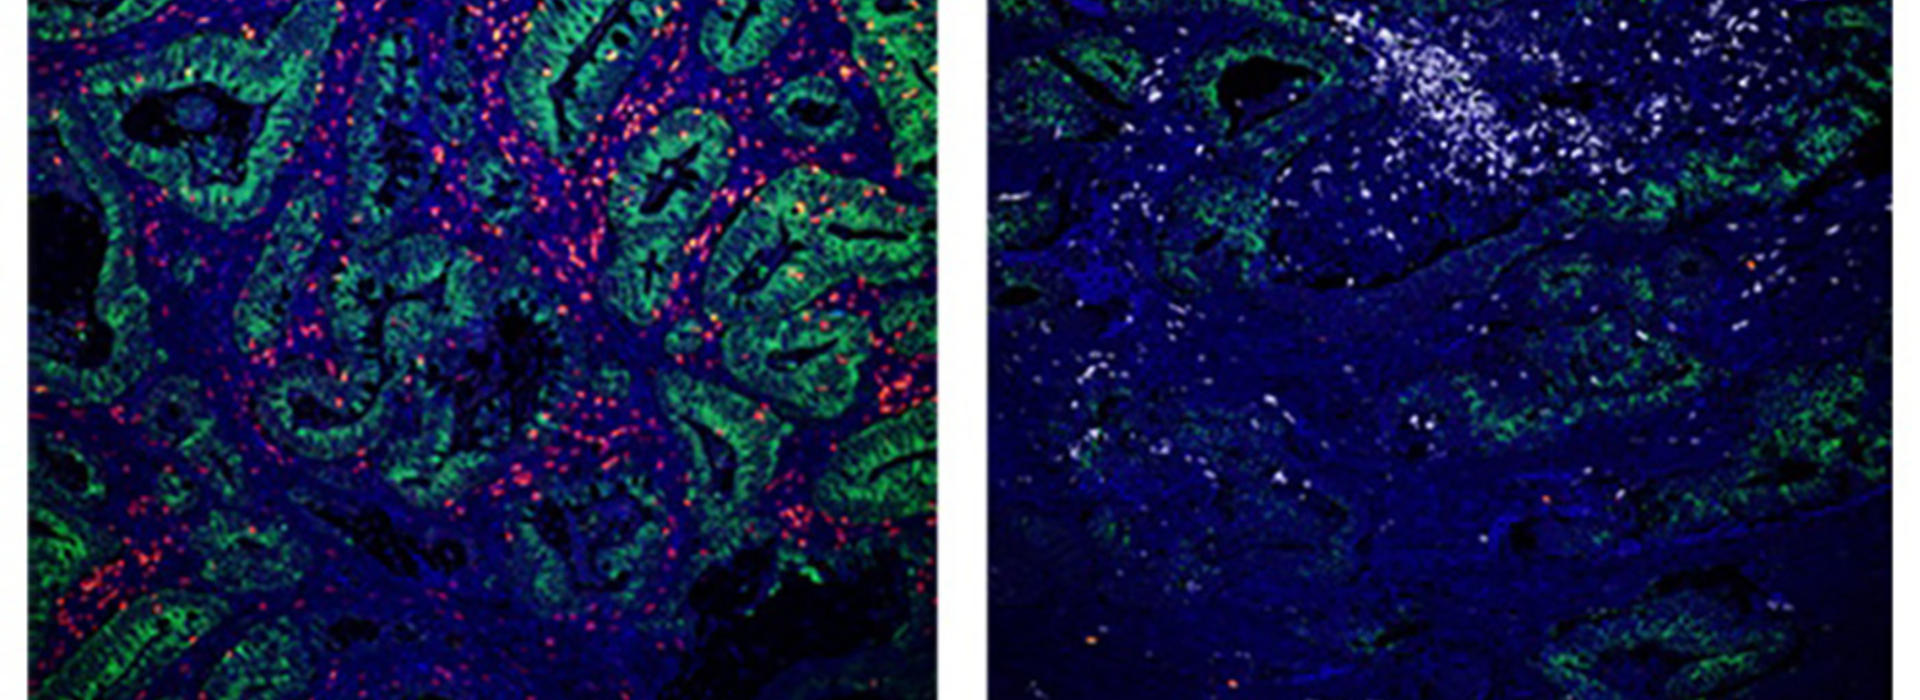 A side-by-side image showing microscopic images of colorectal cancer tumors